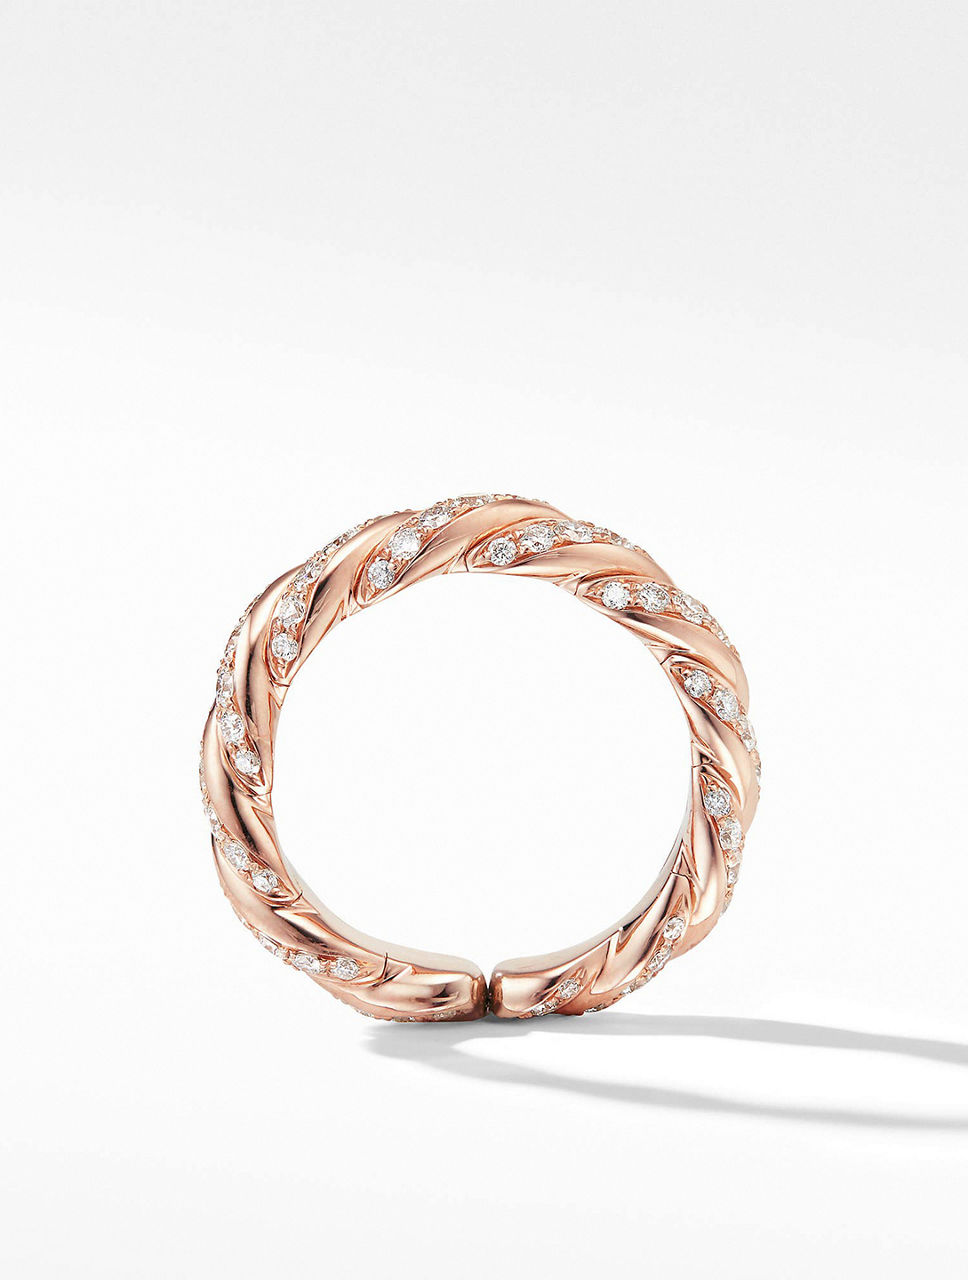 Pavéflex Band Ring In 18k Rose Gold With Diamonds